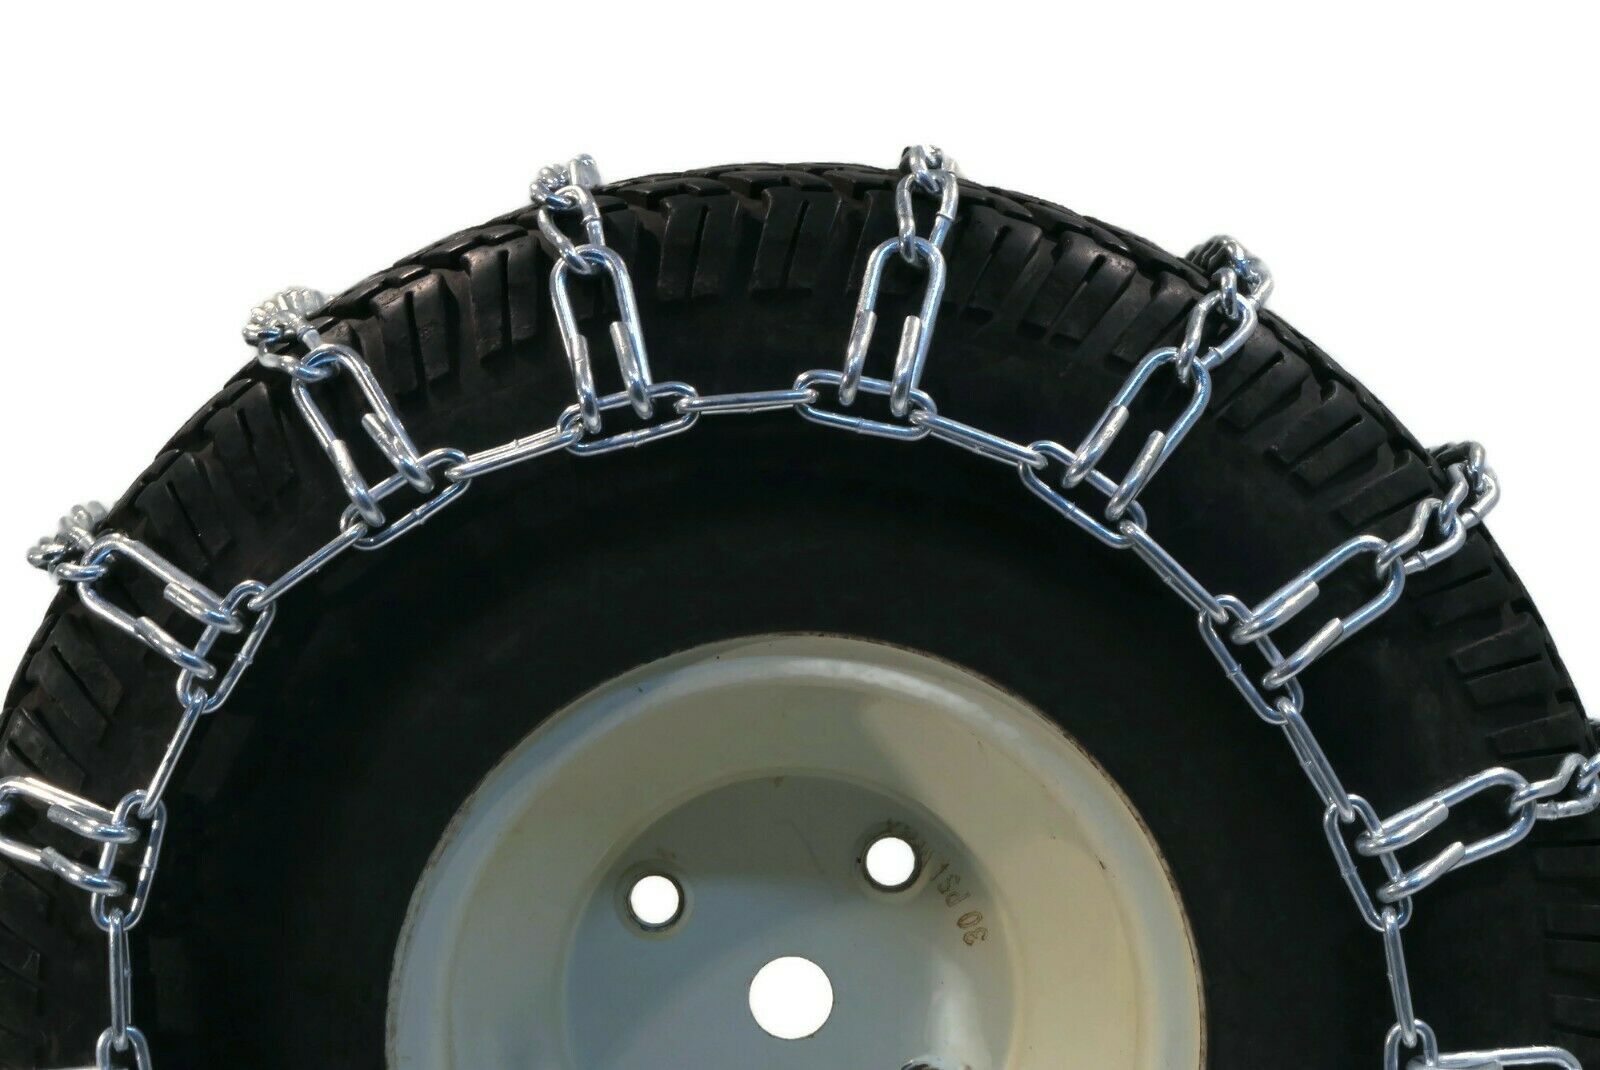 The ROP Shop | 26x12-12 Tire Chains 2 Link John Deere 400 & X Series Lawn Mower Tractor Rider - image 4 of 6